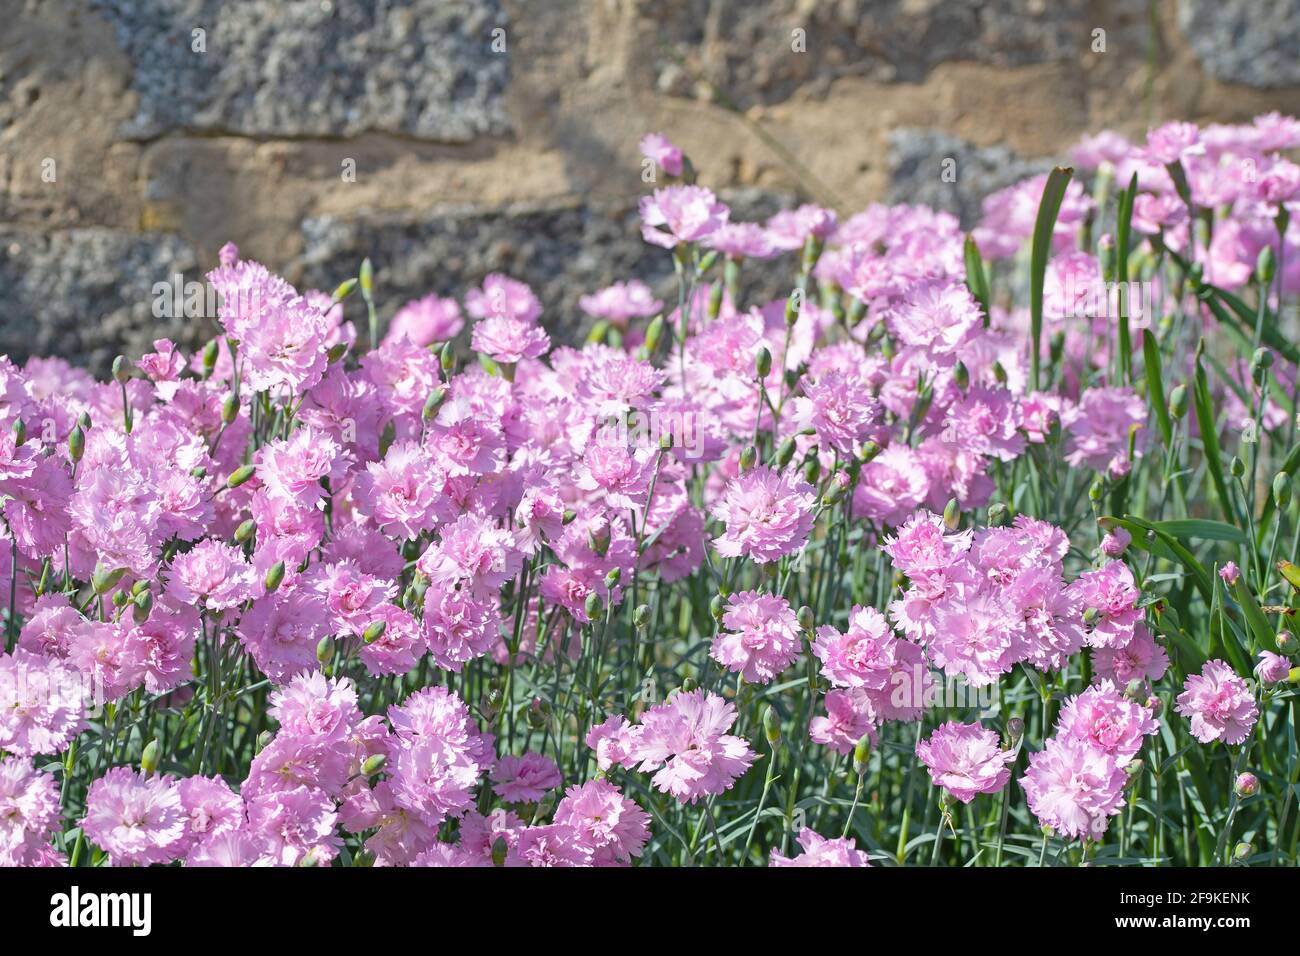 Flowering carnations, dianthus, in the garden Stock Photo